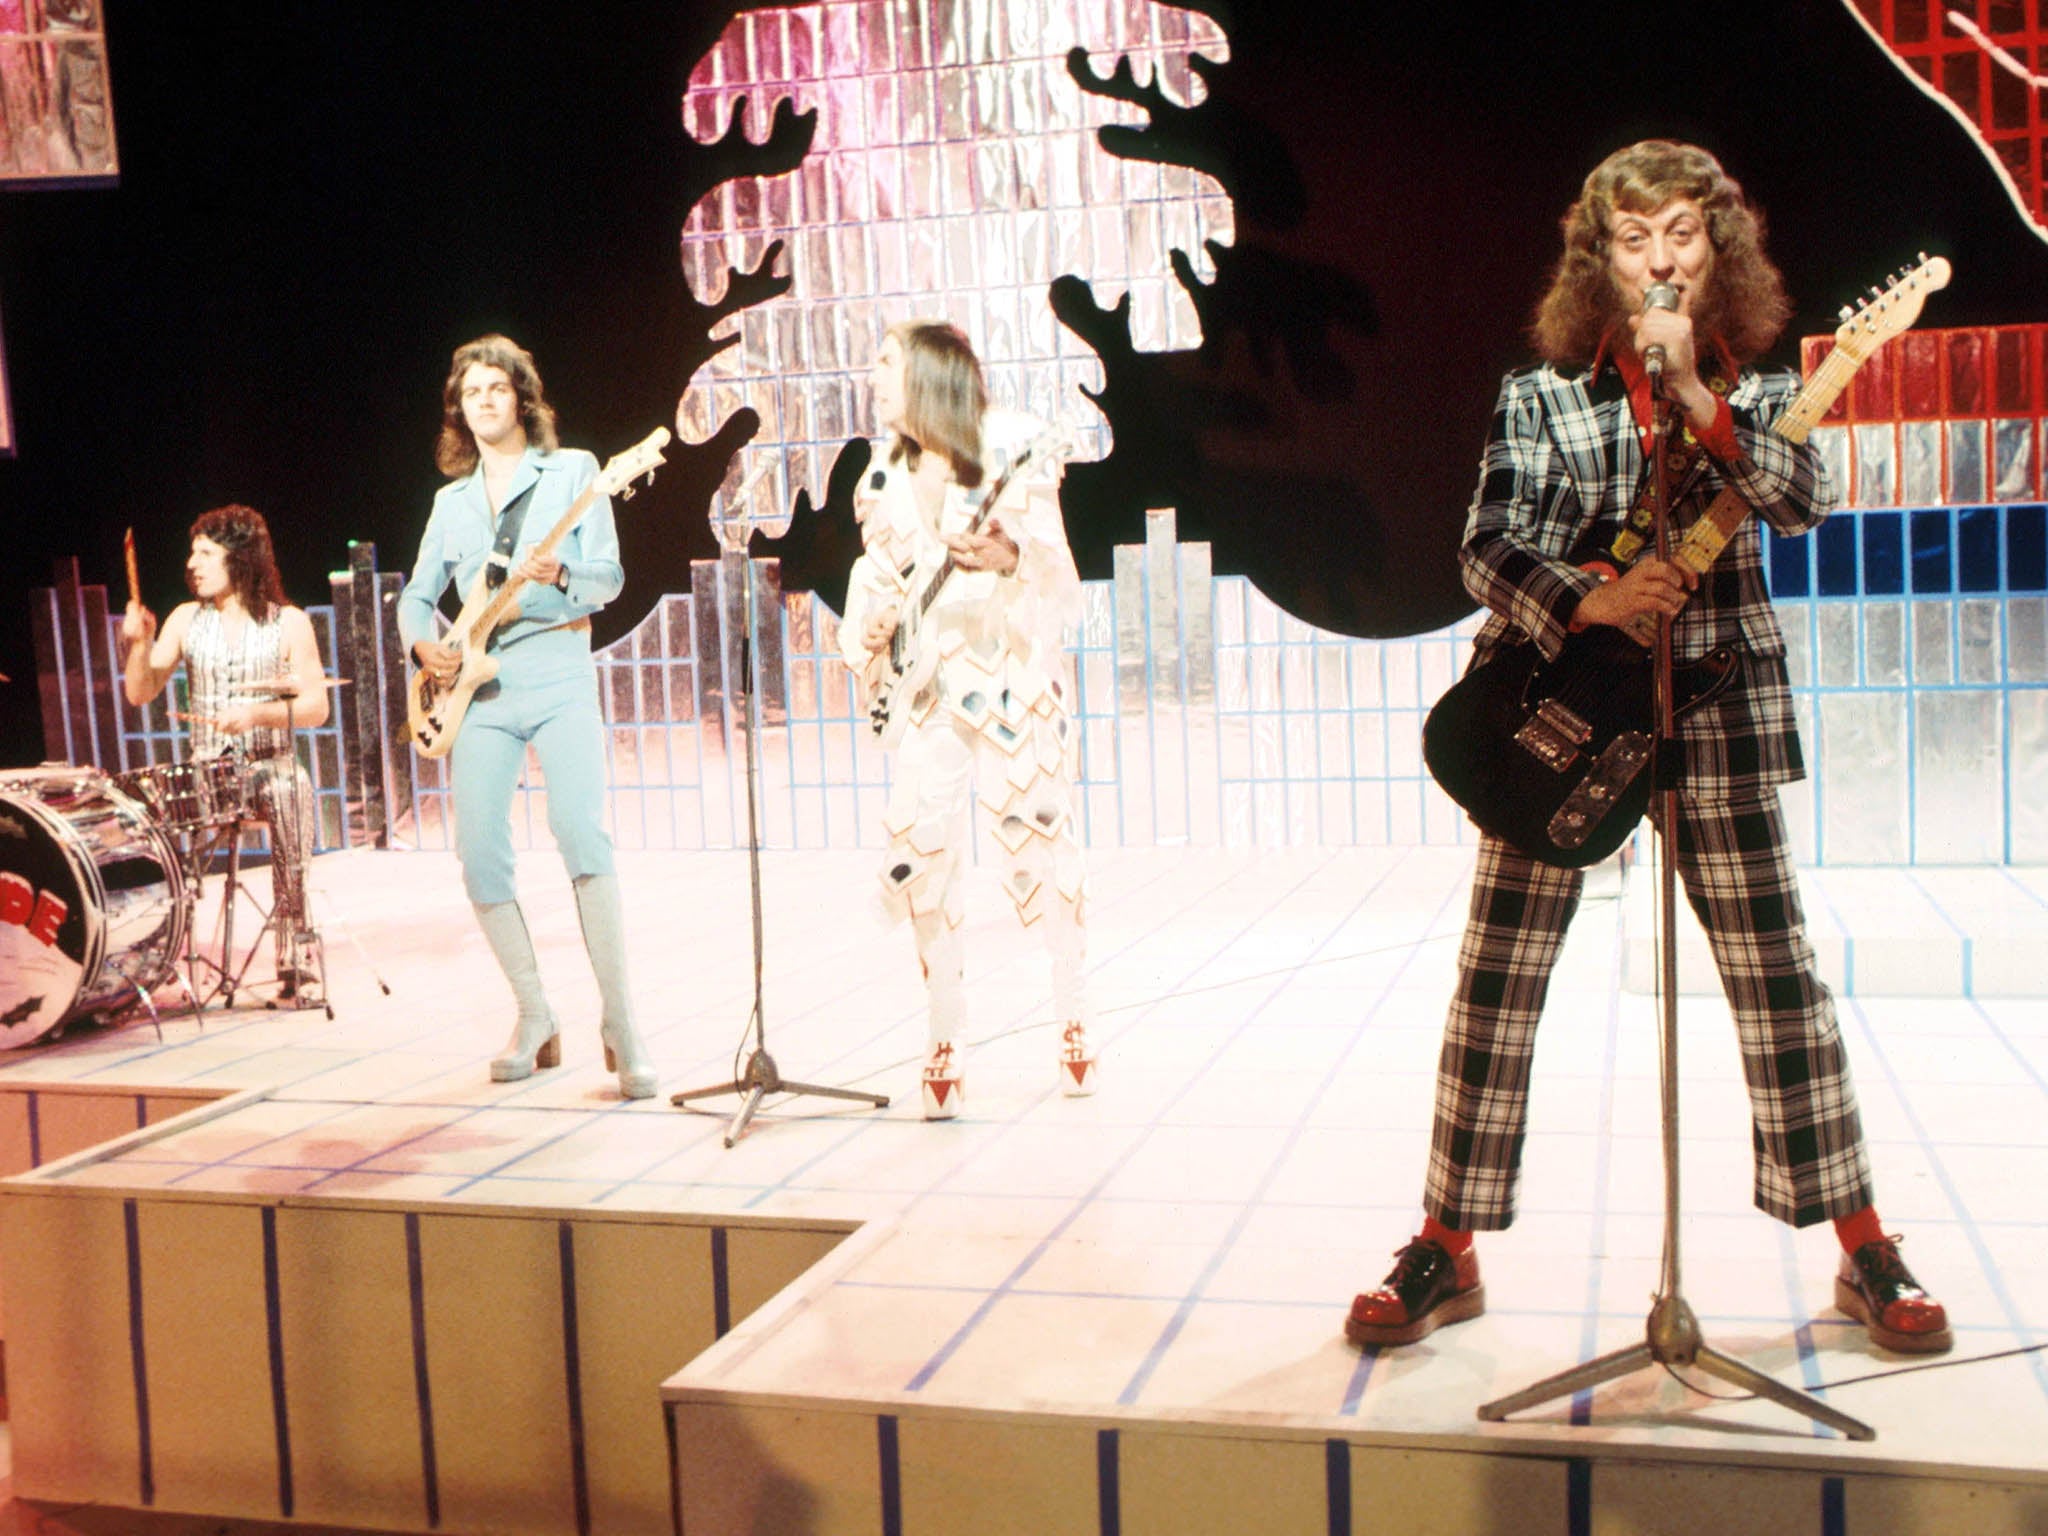 Drummer Don Powell, bassist Jim Lea, guitarist Dave Hill and singer Noddy Holder of Slade performing 'Cum on Feel the Noize' on the BBC television show Top of the Pops in 1973.